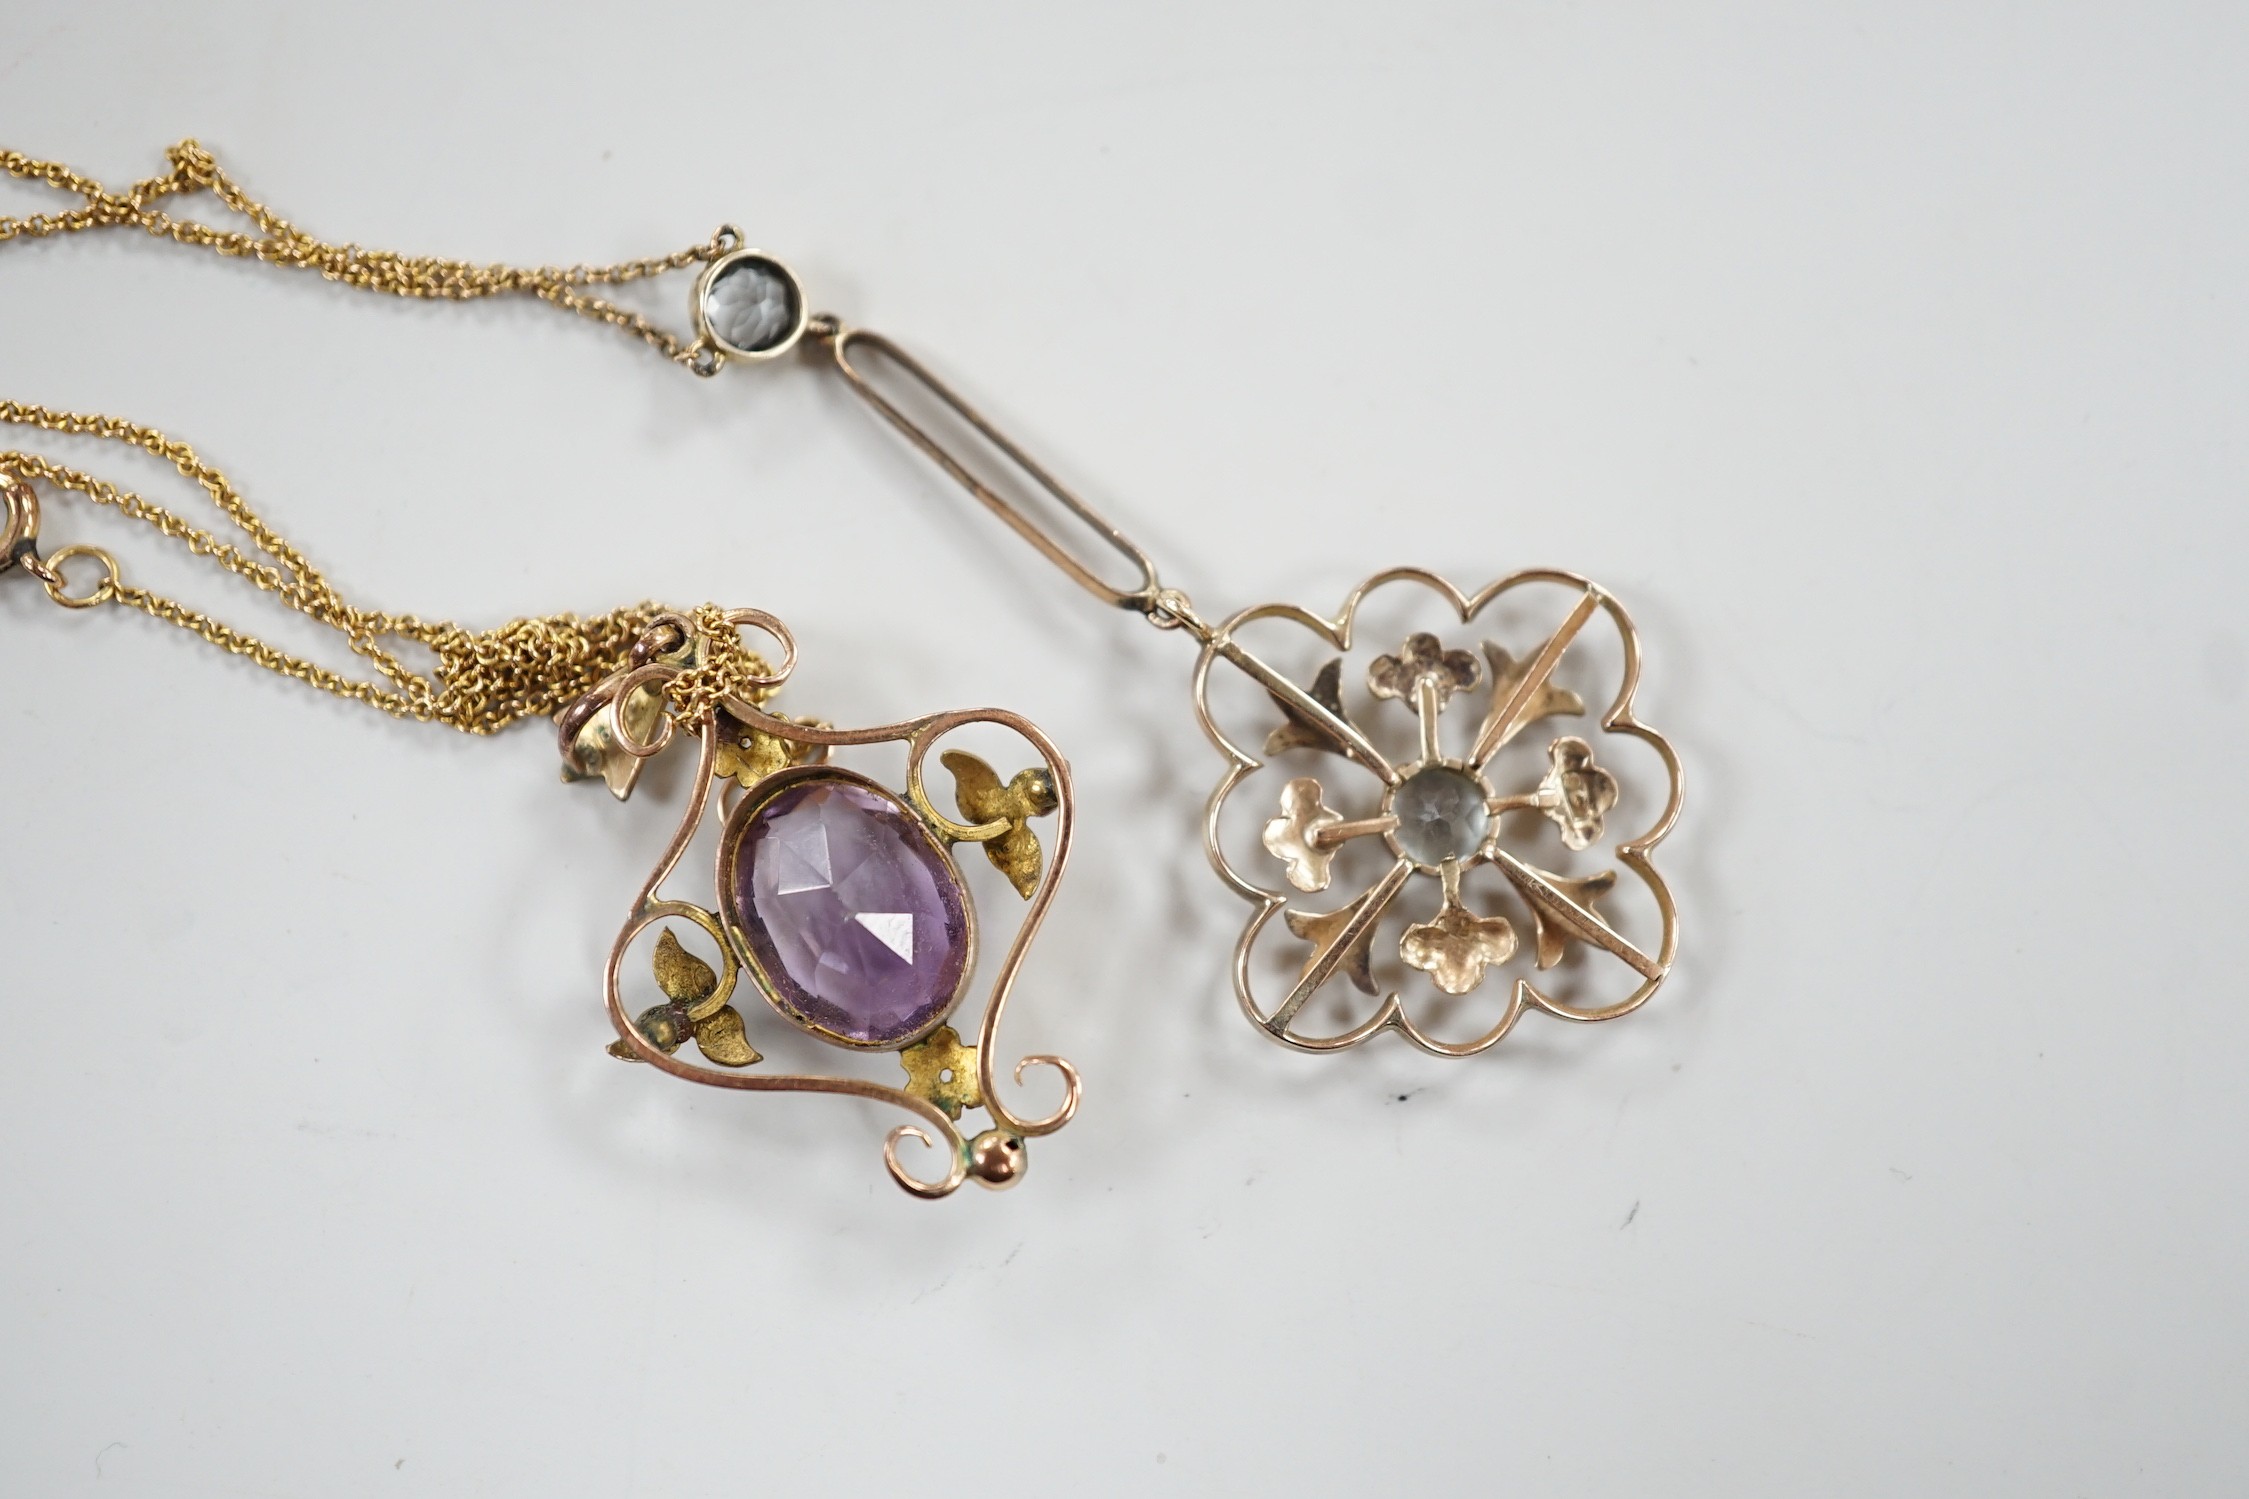 Two Edwardian 9ct and gem set pendants, including amethyst and seed pearl and two stone aquamarine drop, 53mm on a yellow metal chain, gross weight 6.3 grams.